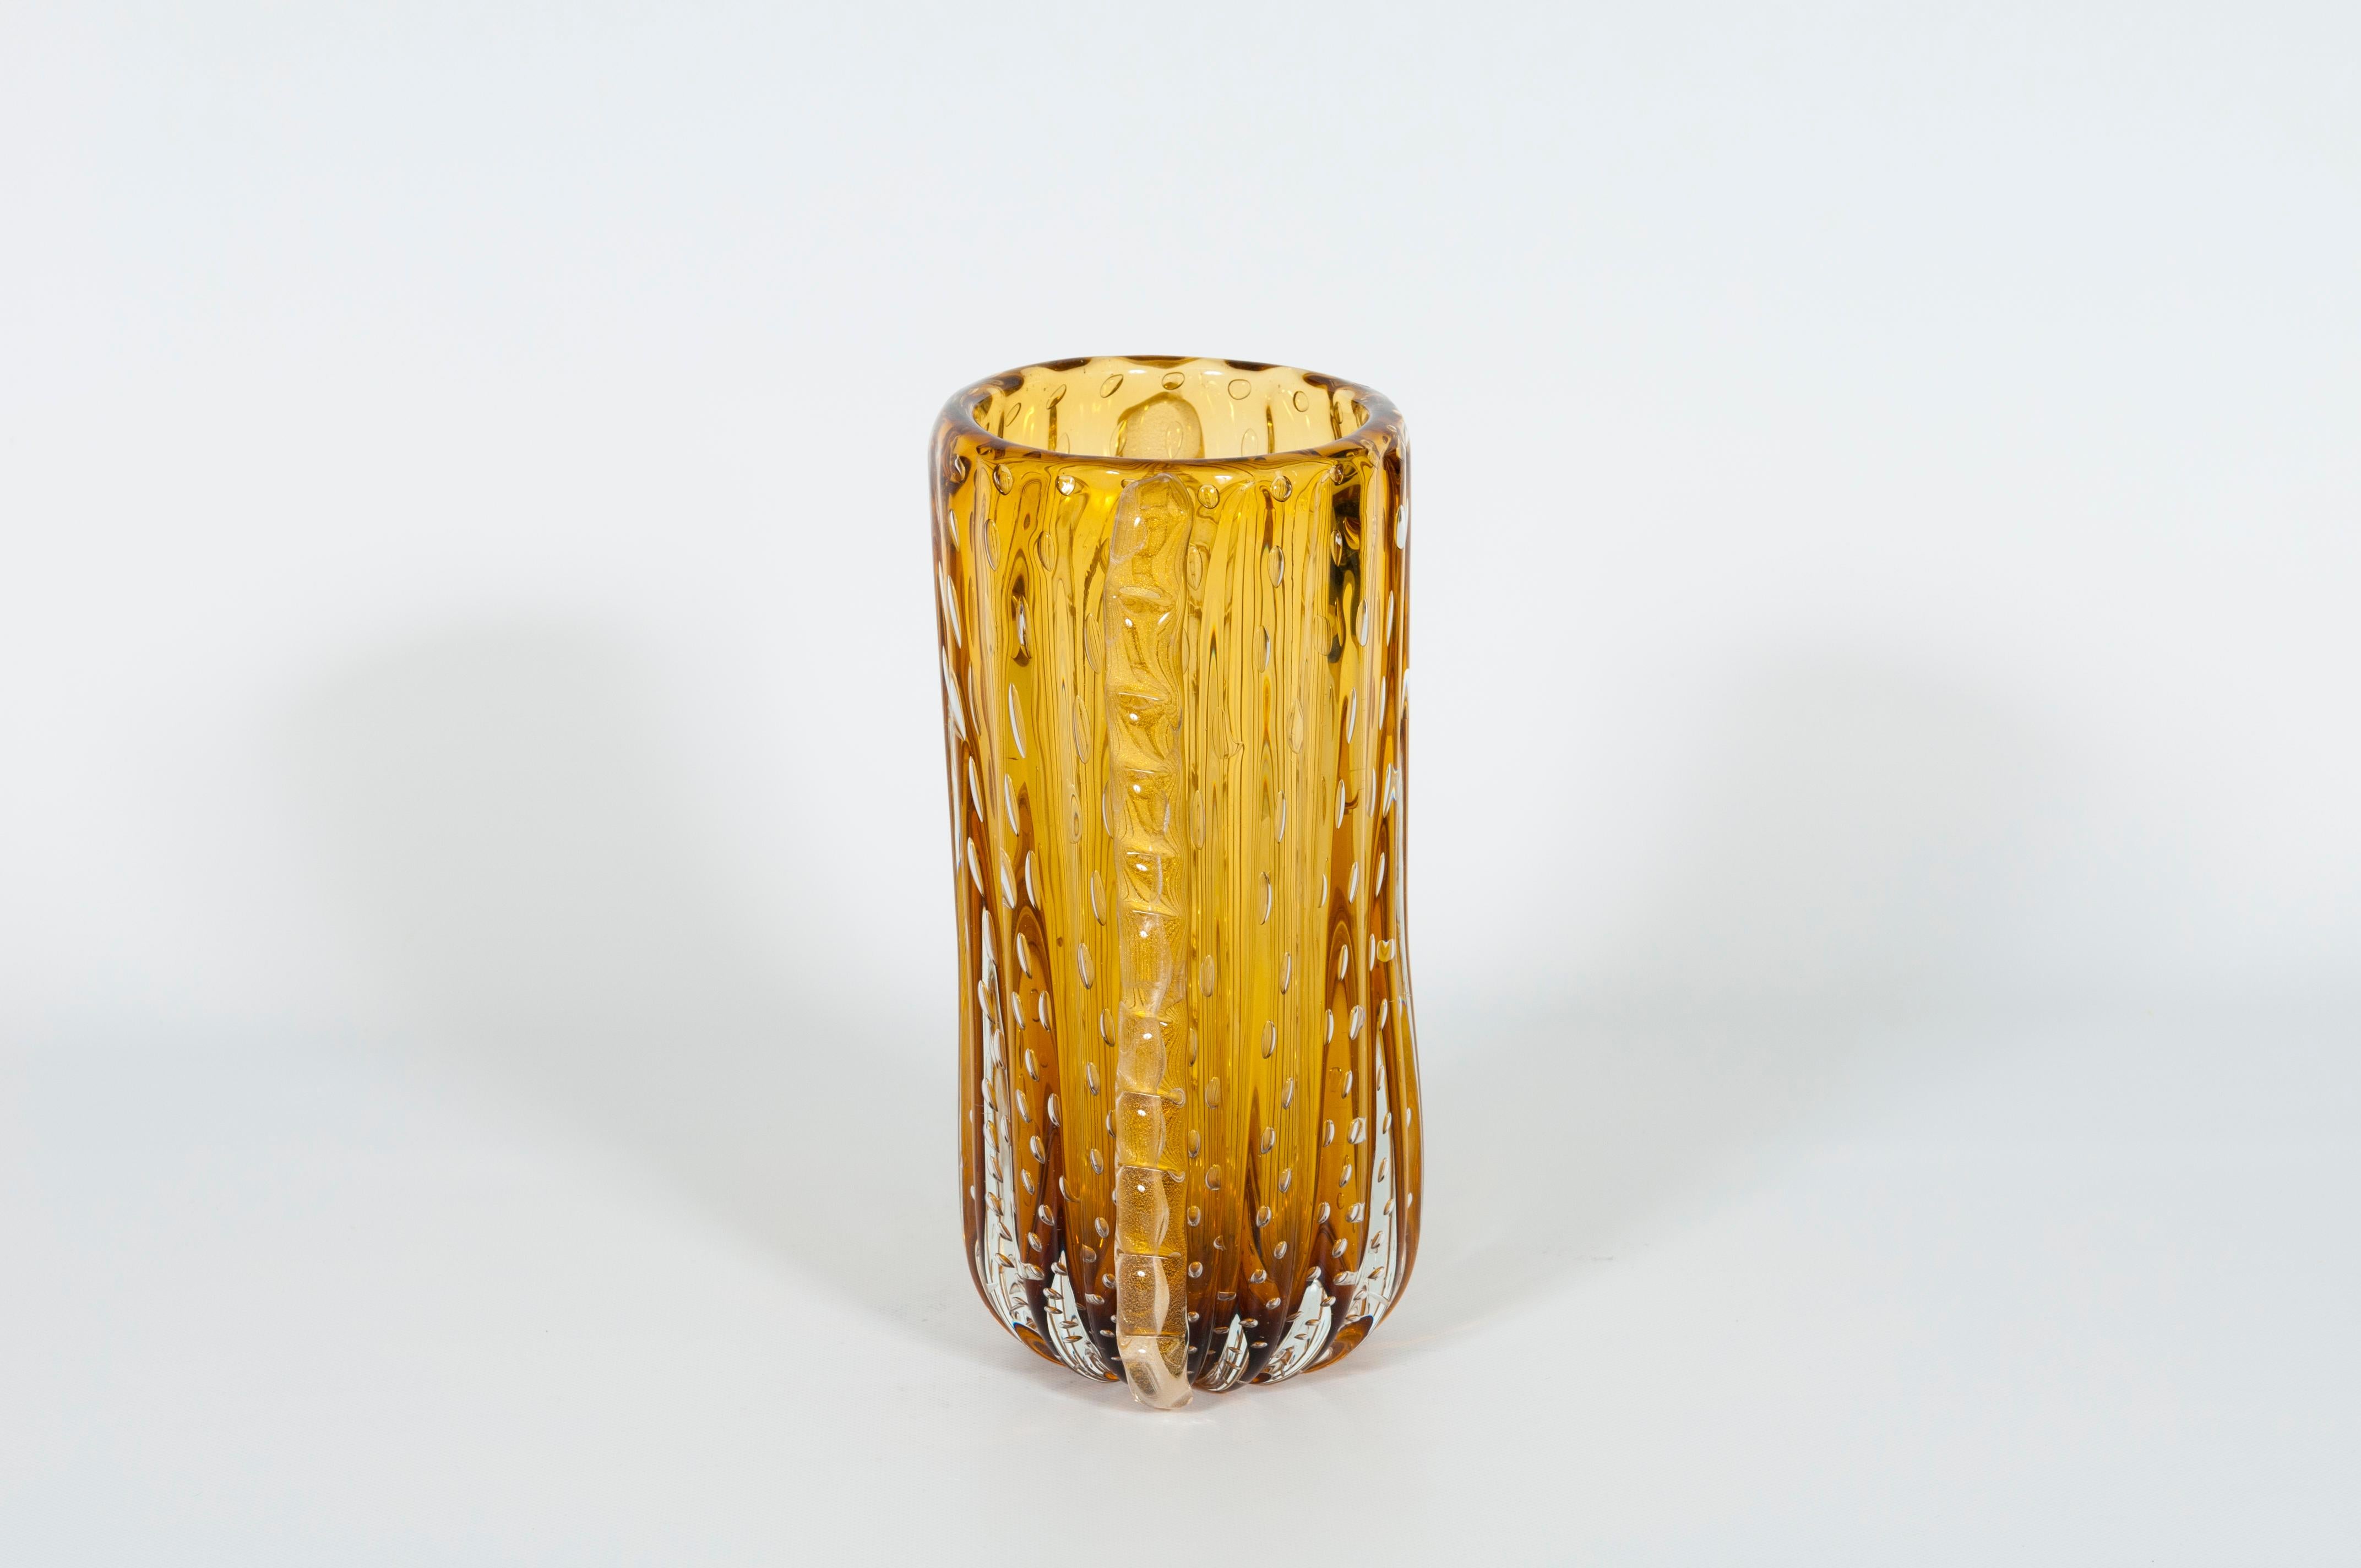 Amber Color Murano Glass Bubble Vase with Morise Attributed to Donà, 1980s Italy For Sale 2